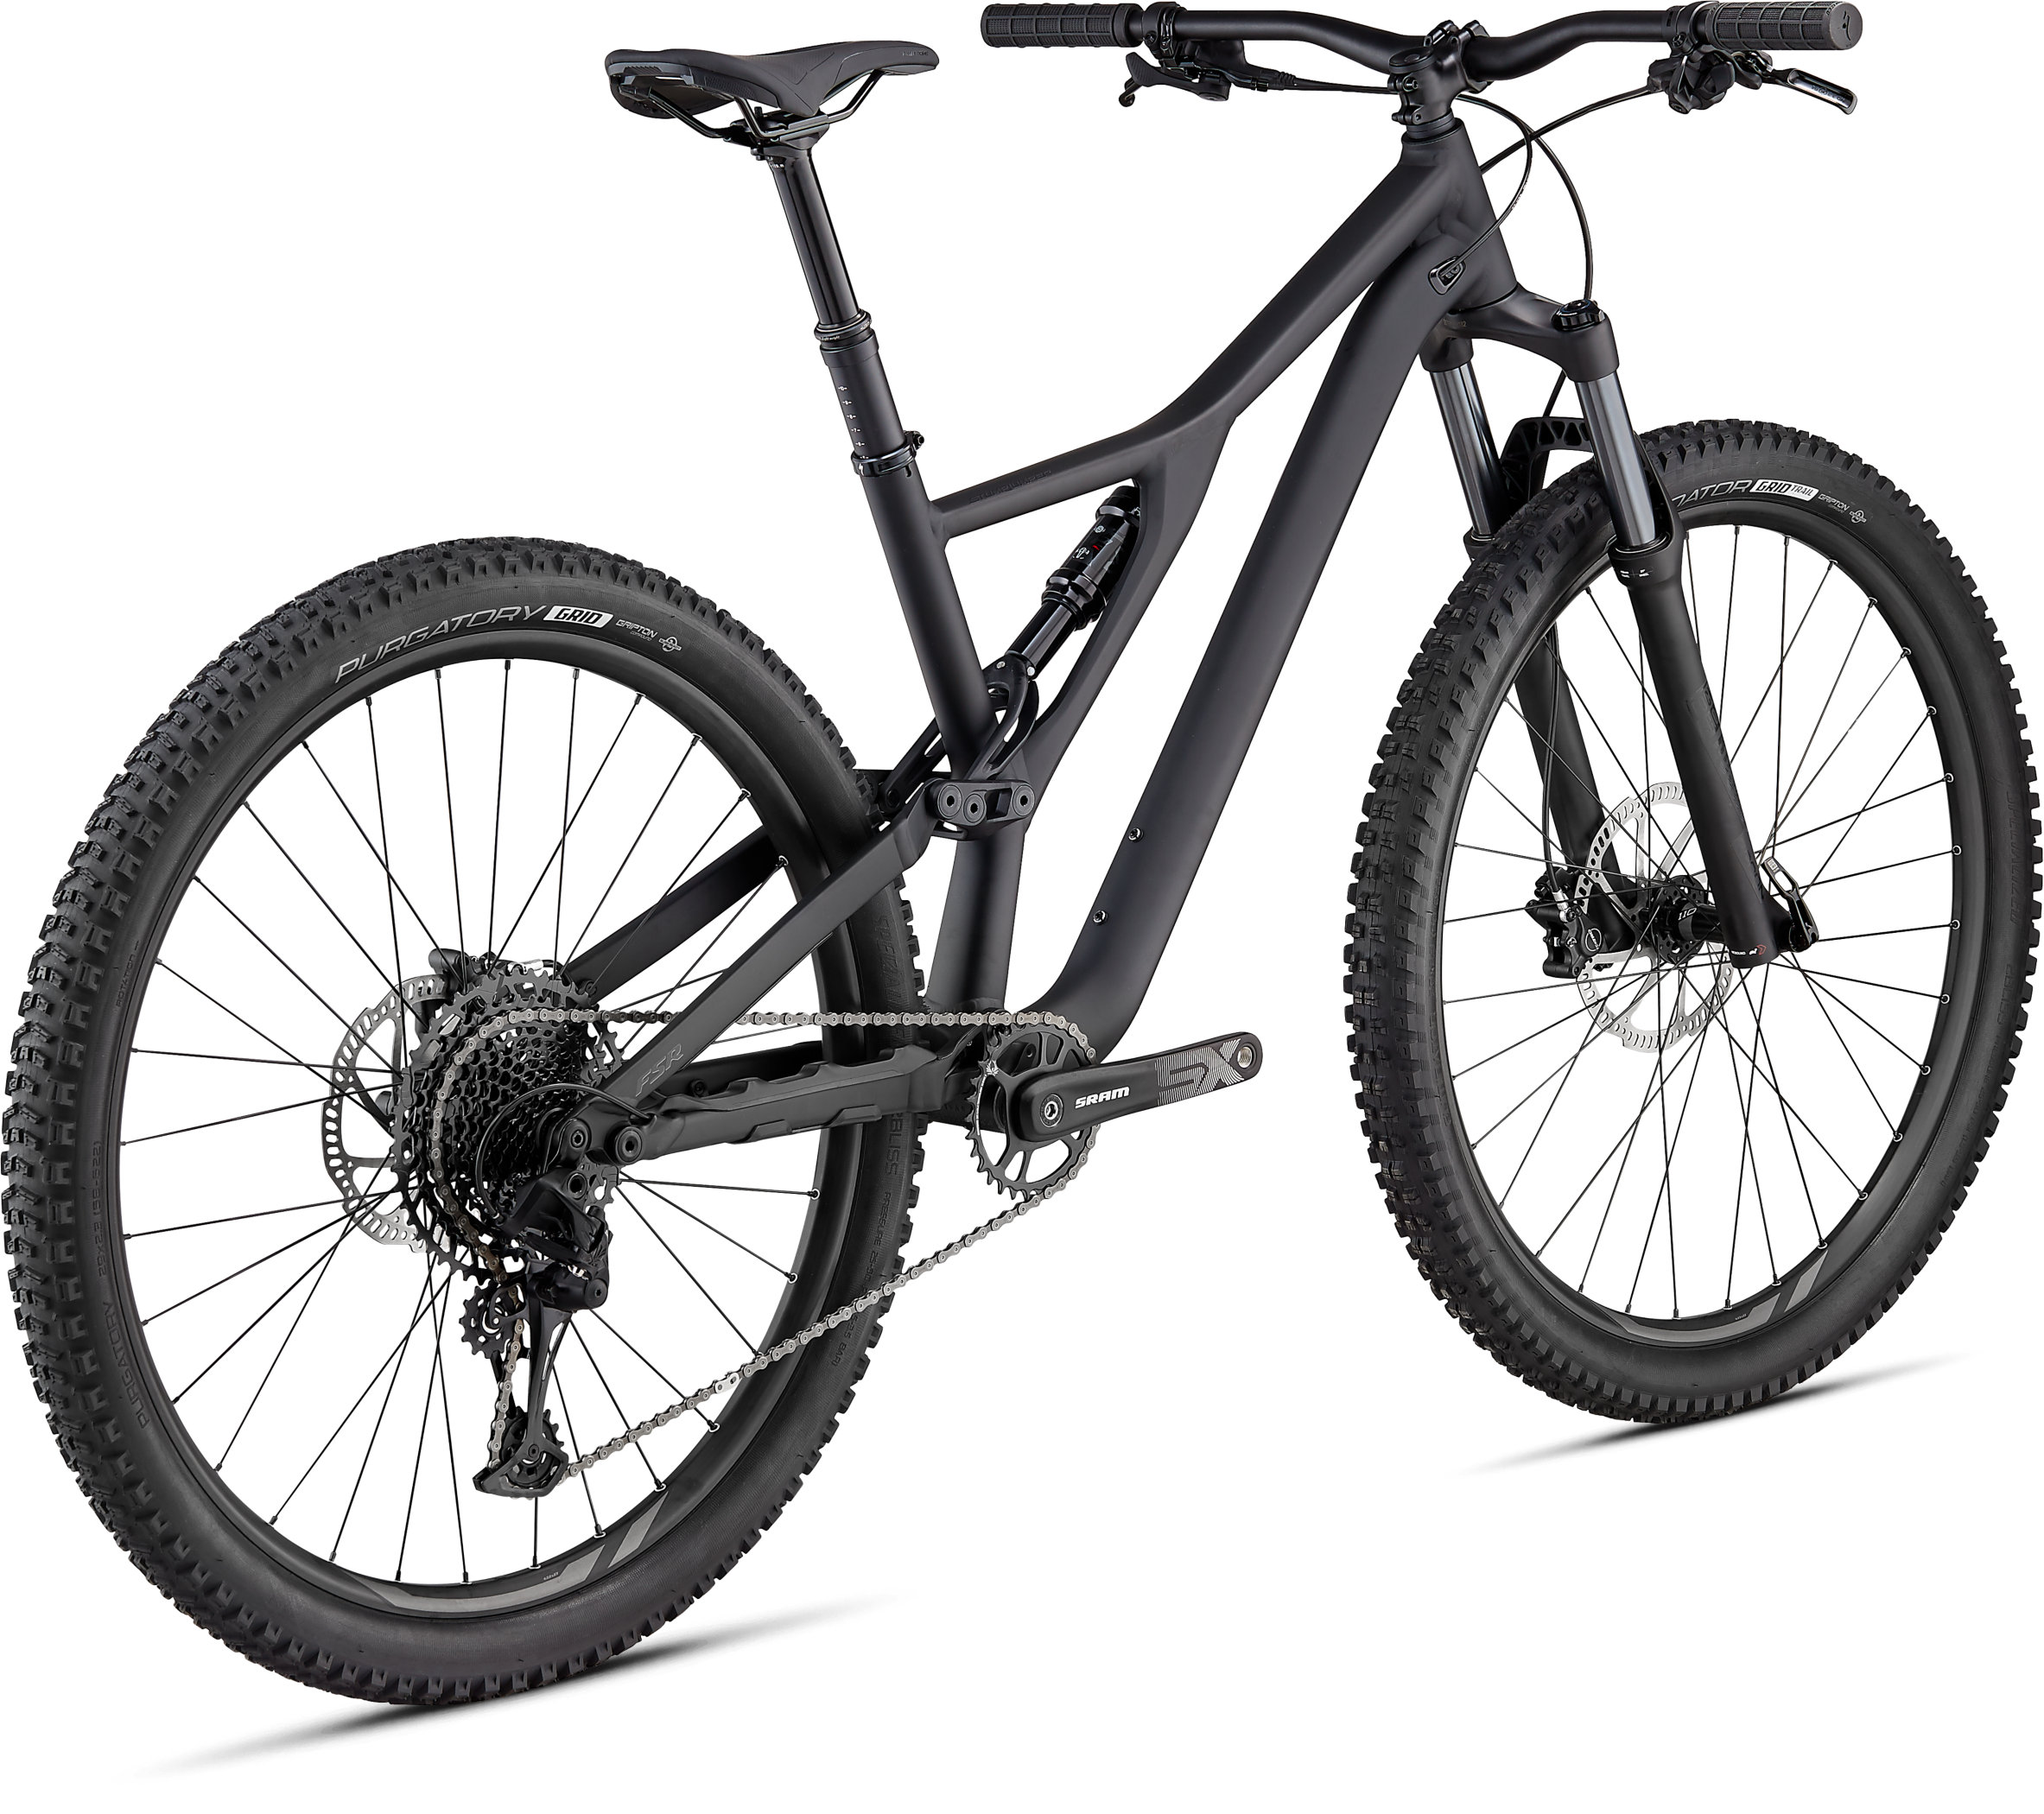 Stumpjumper ST Alloy 29 | Specialized.com